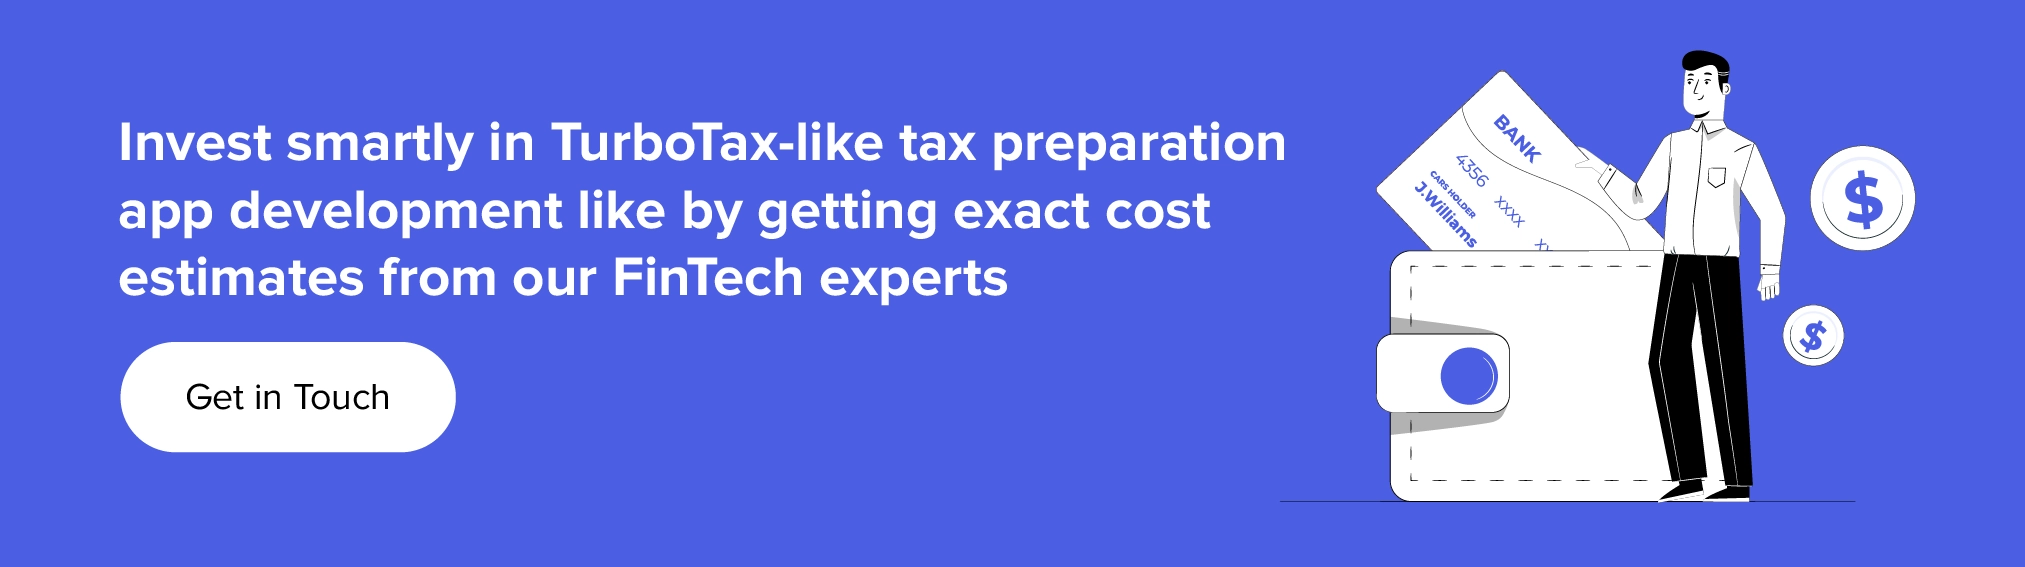 Get complete cost estimates from our experts for TurboTax app development